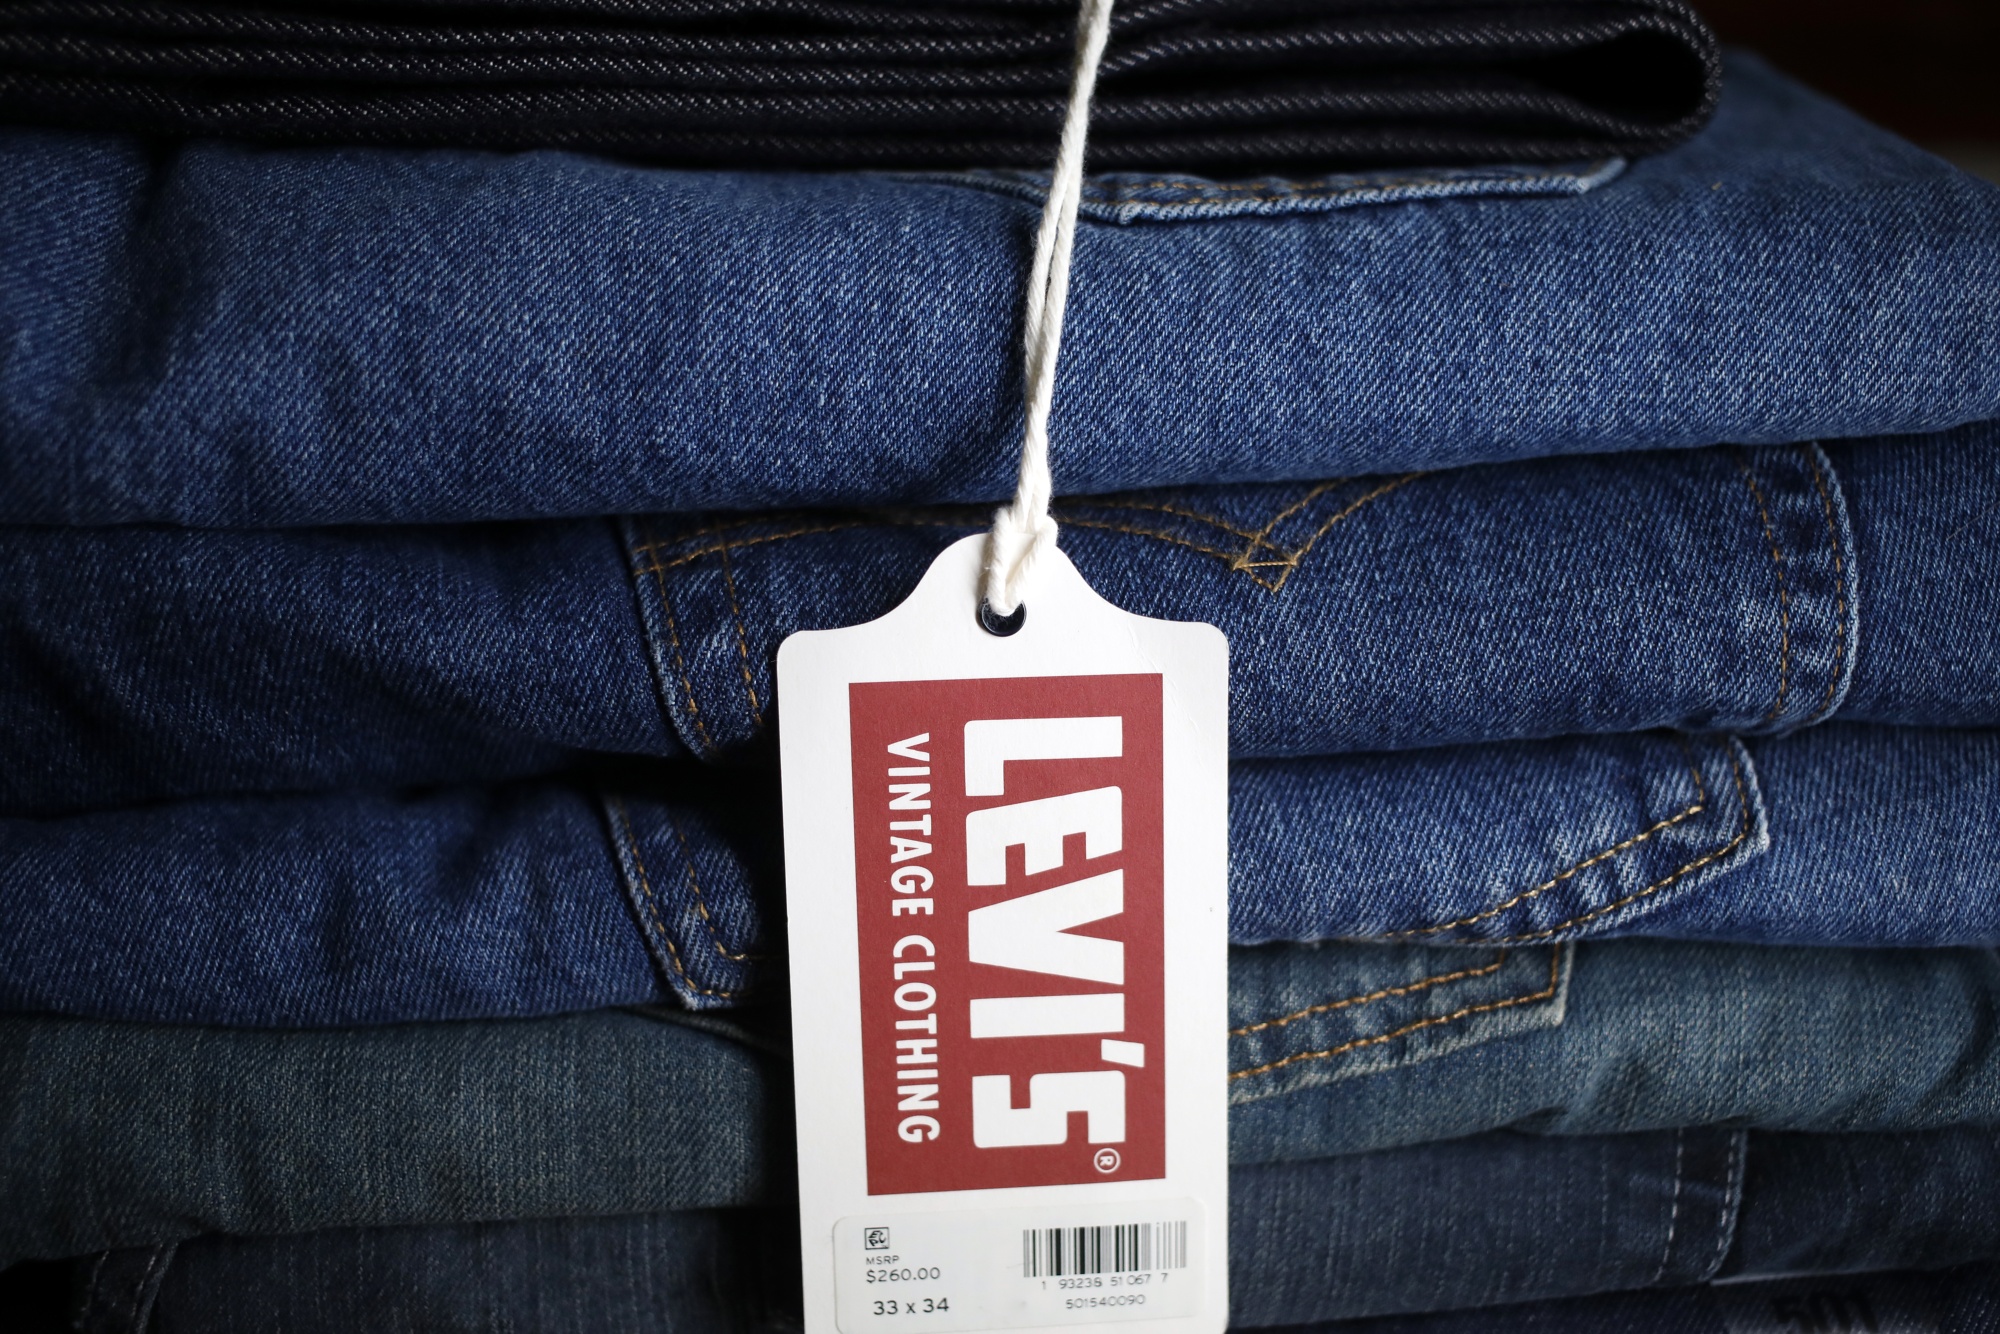 Blue Jeans in Line for an Environmental Redesign - Bloomberg